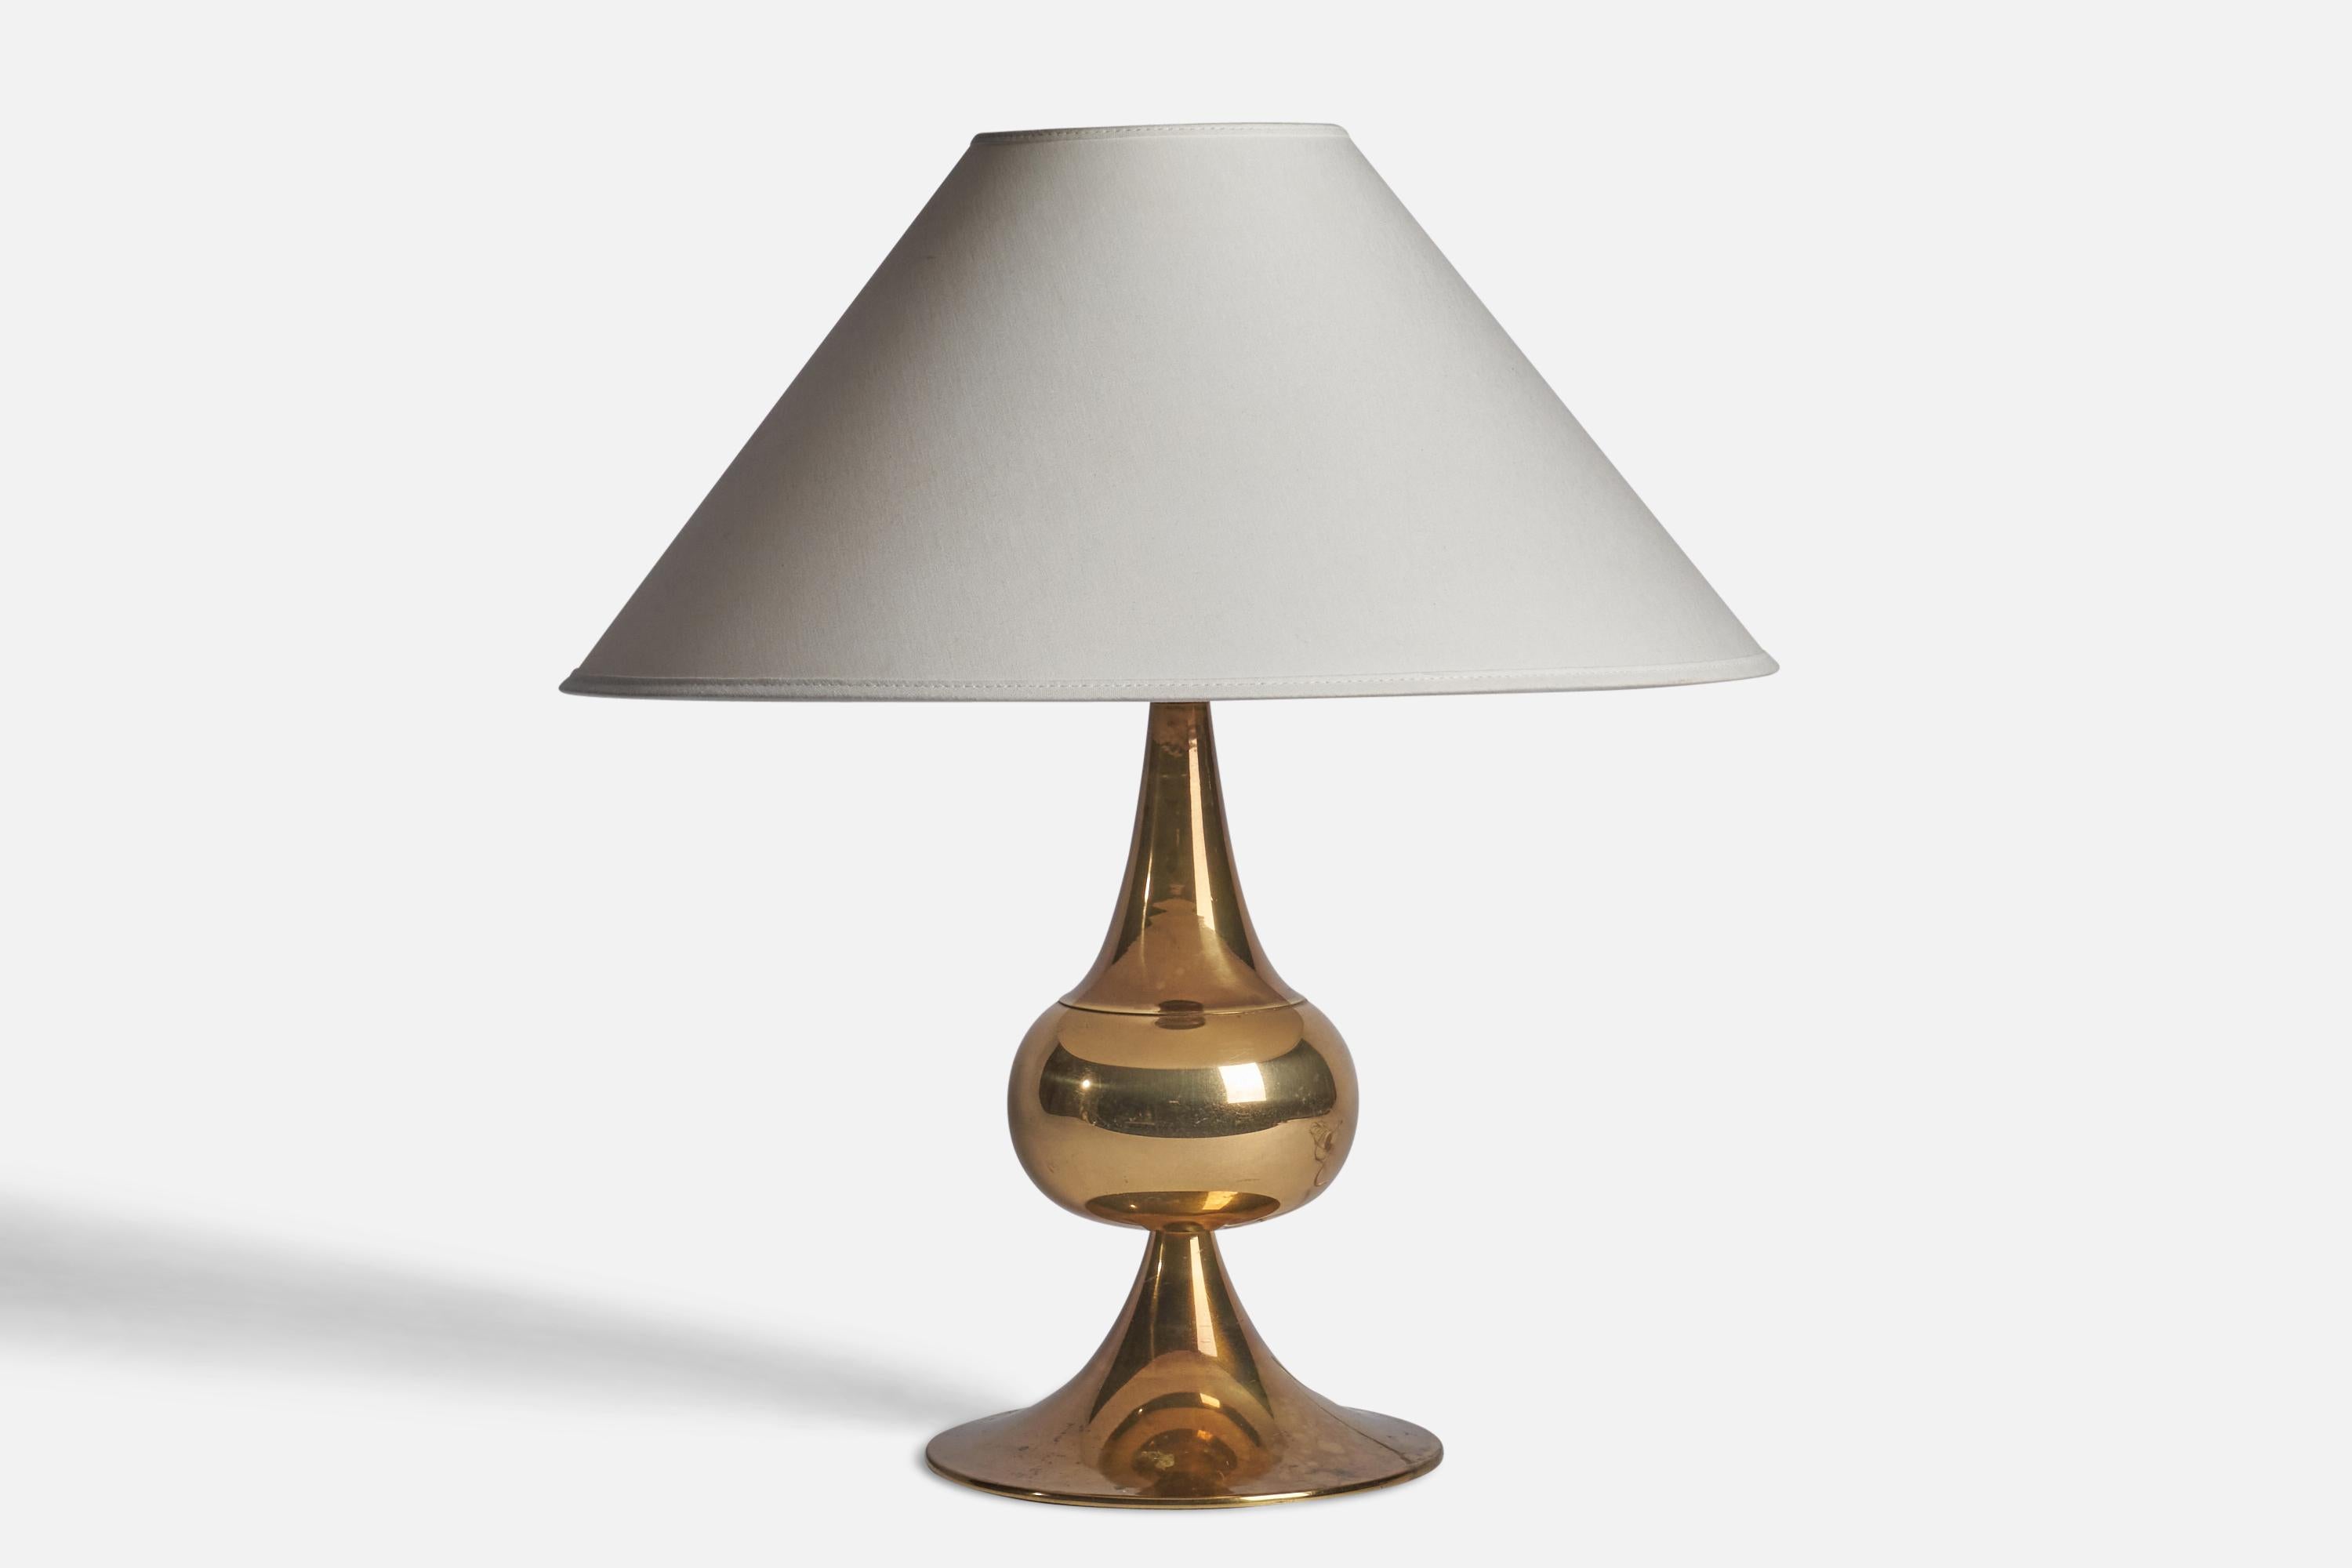 A brass table lamp designed by Kjell Blomberg and produced by Örsjö Belysning, Sweden, 1970s.

Dimensions of Lamp (inches): 13” H x 6.75” Diameter
Dimensions of Shade (inches): 4.5” Top Diameter x 16” Bottom Diameter x 7.25” H
Dimensions of Lamp